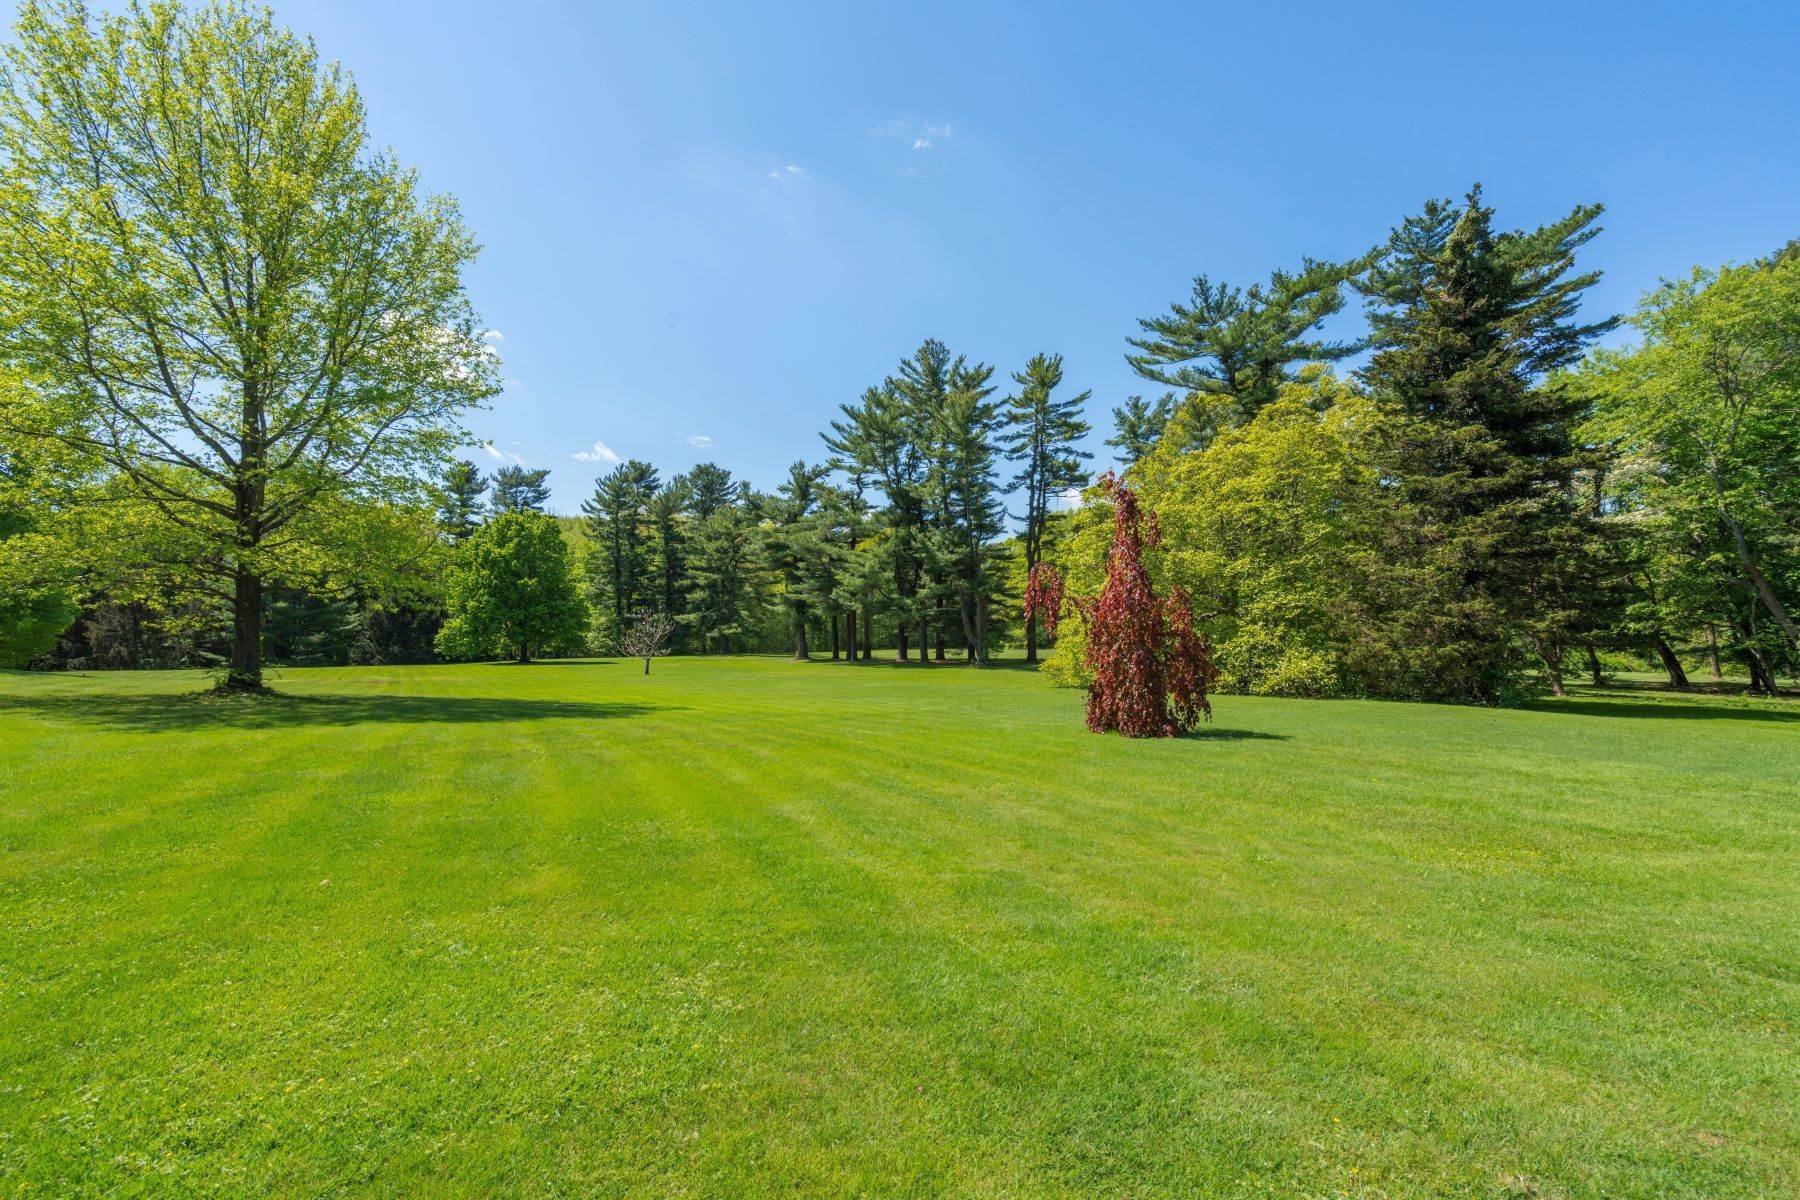 Land for Sale at 72 Post Road, Old Westbury, NY, 11568 72 Post Road Old Westbury, New York 11568 United States